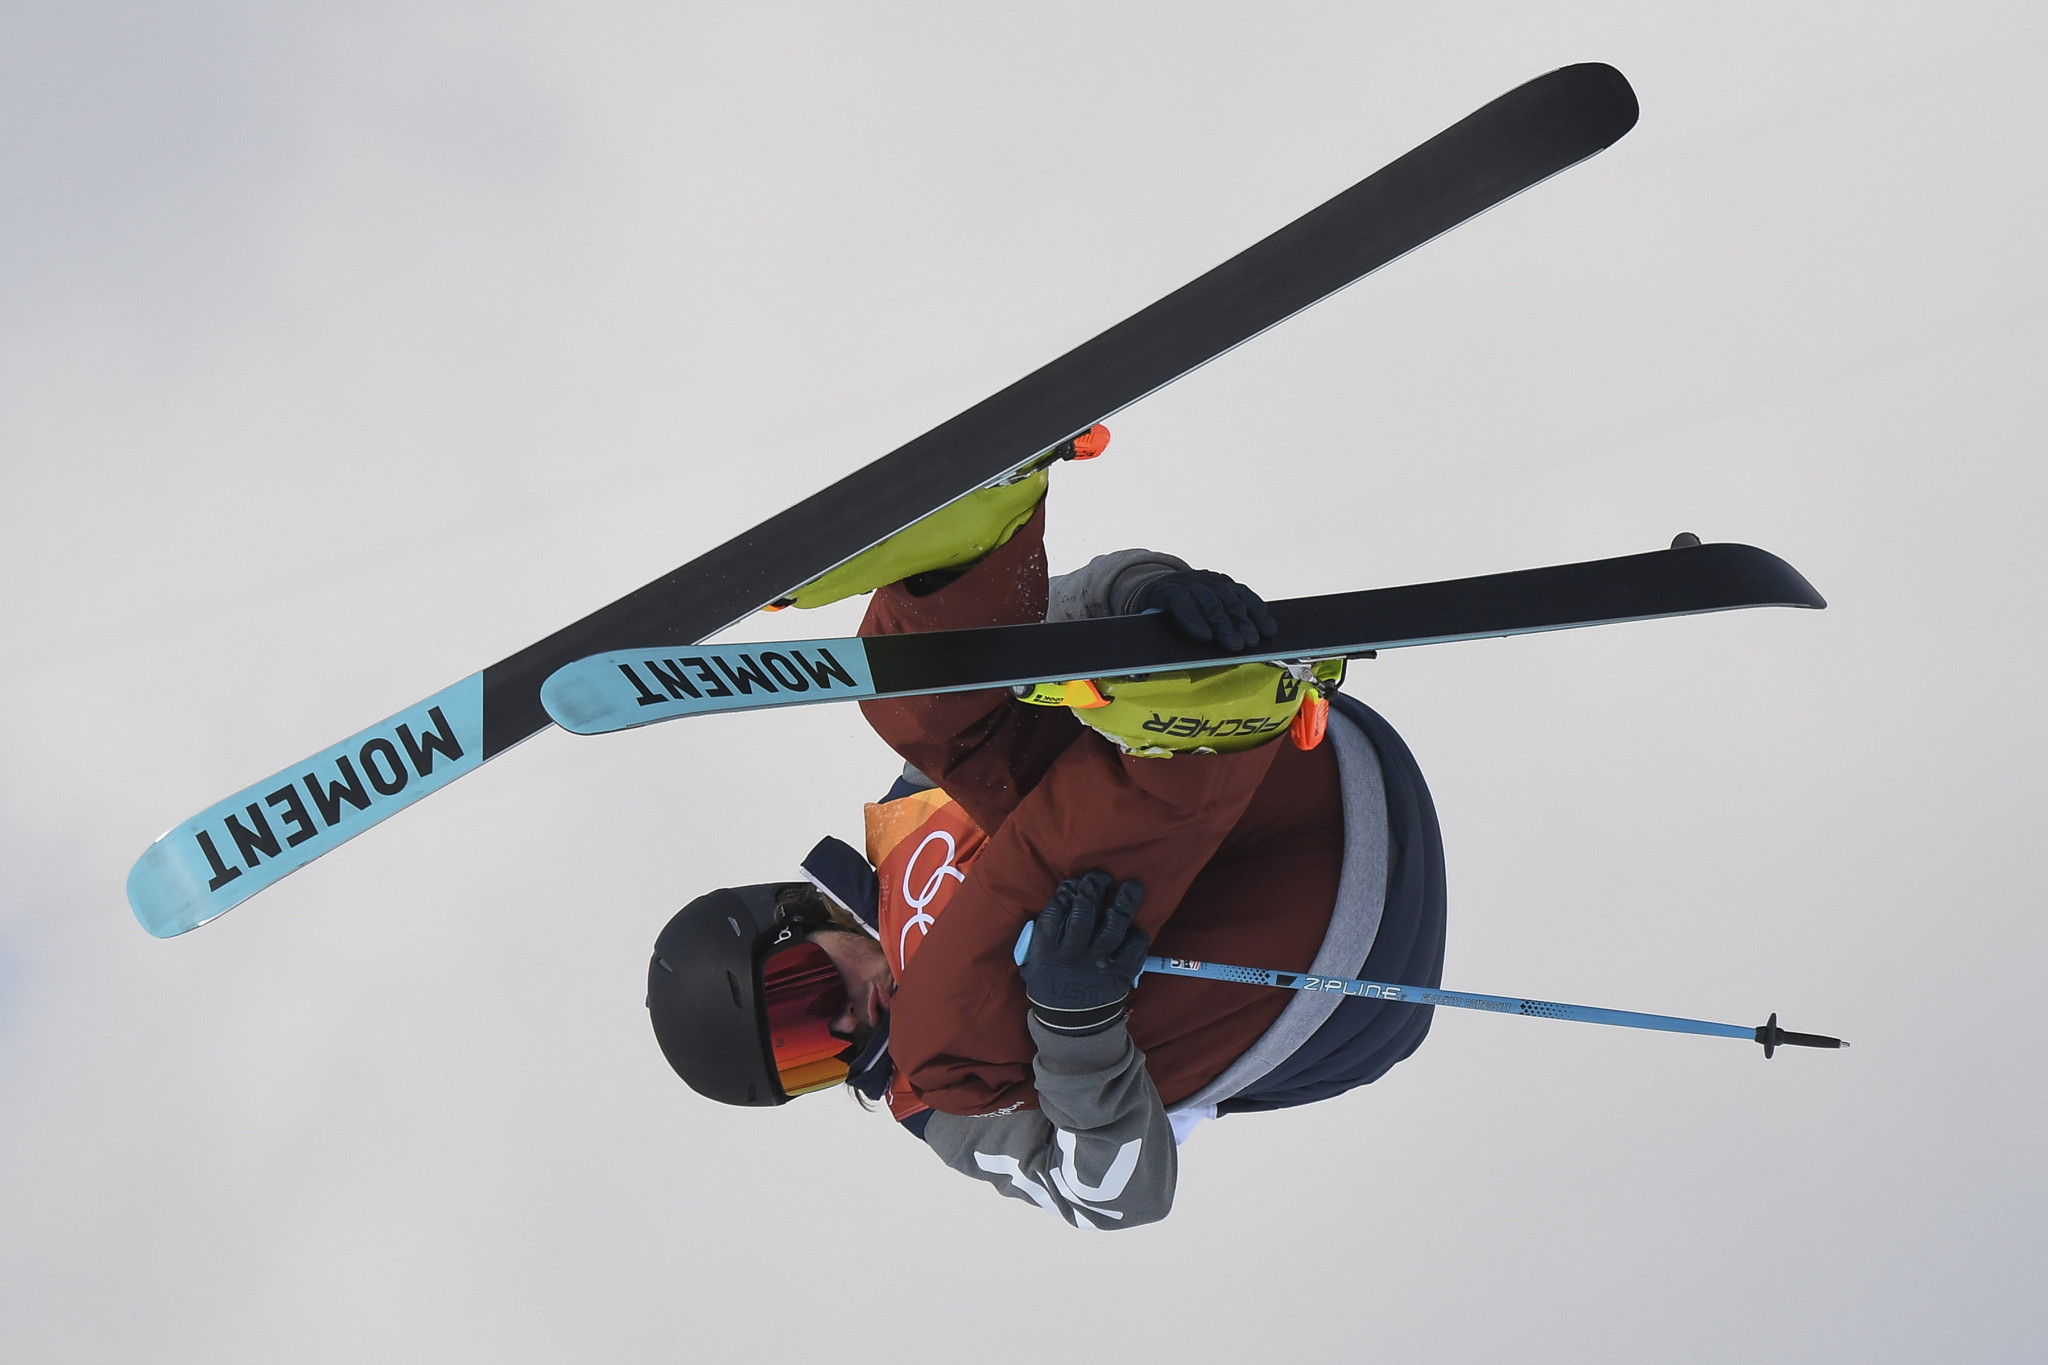 David Wise heads a strong home line-up with the first halfpipe competitions of this season’s FIS Freestyle Skiing World Cup tour set to take place in Copper Mountain in Colorado this week ©Getty Images